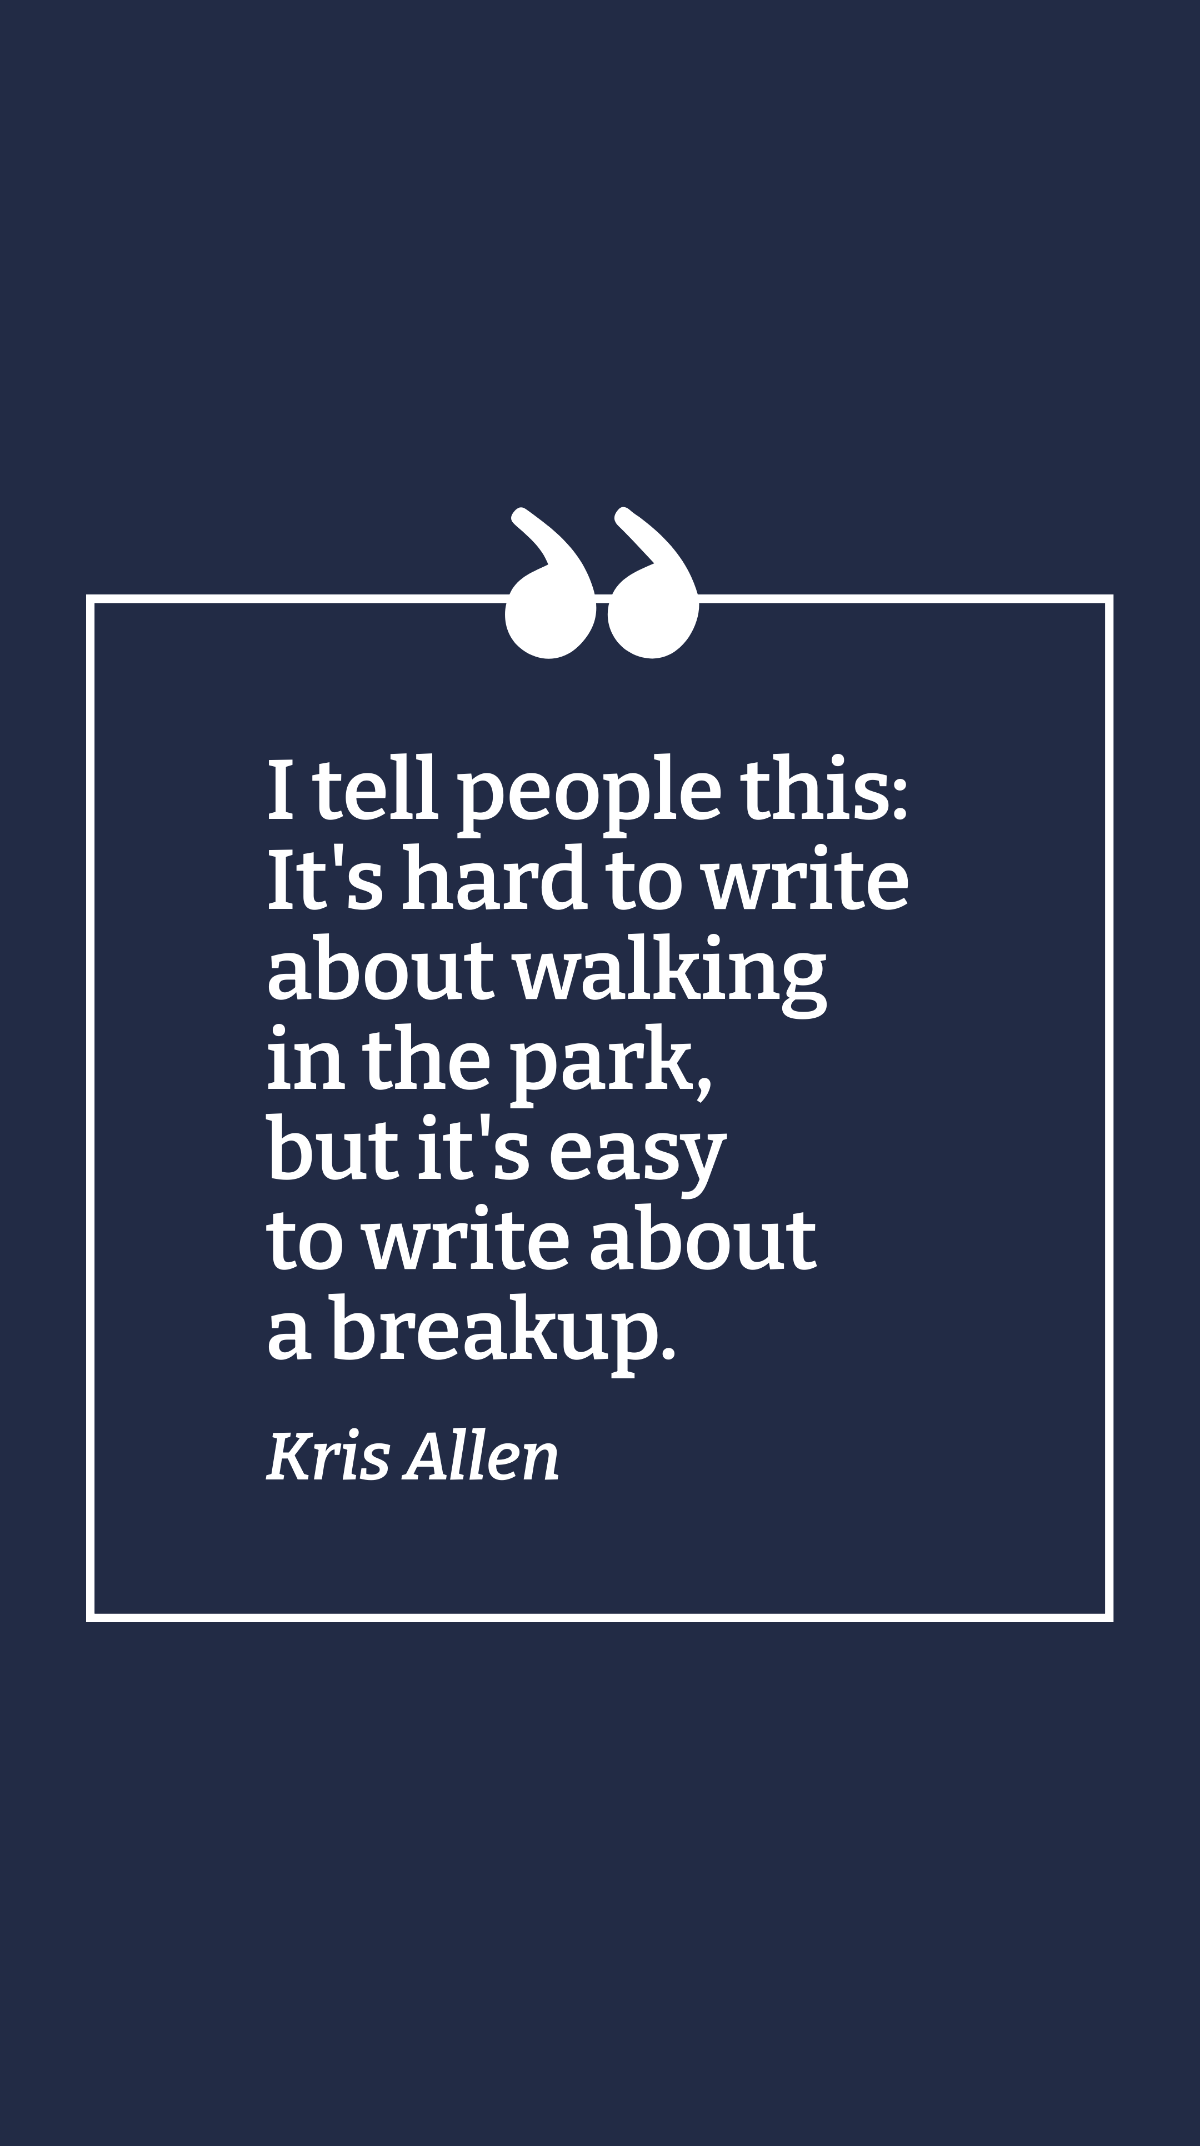 Free Kris Allen - I tell people this: It's hard to write about walking in the park, but it's easy to write about a breakup. Template